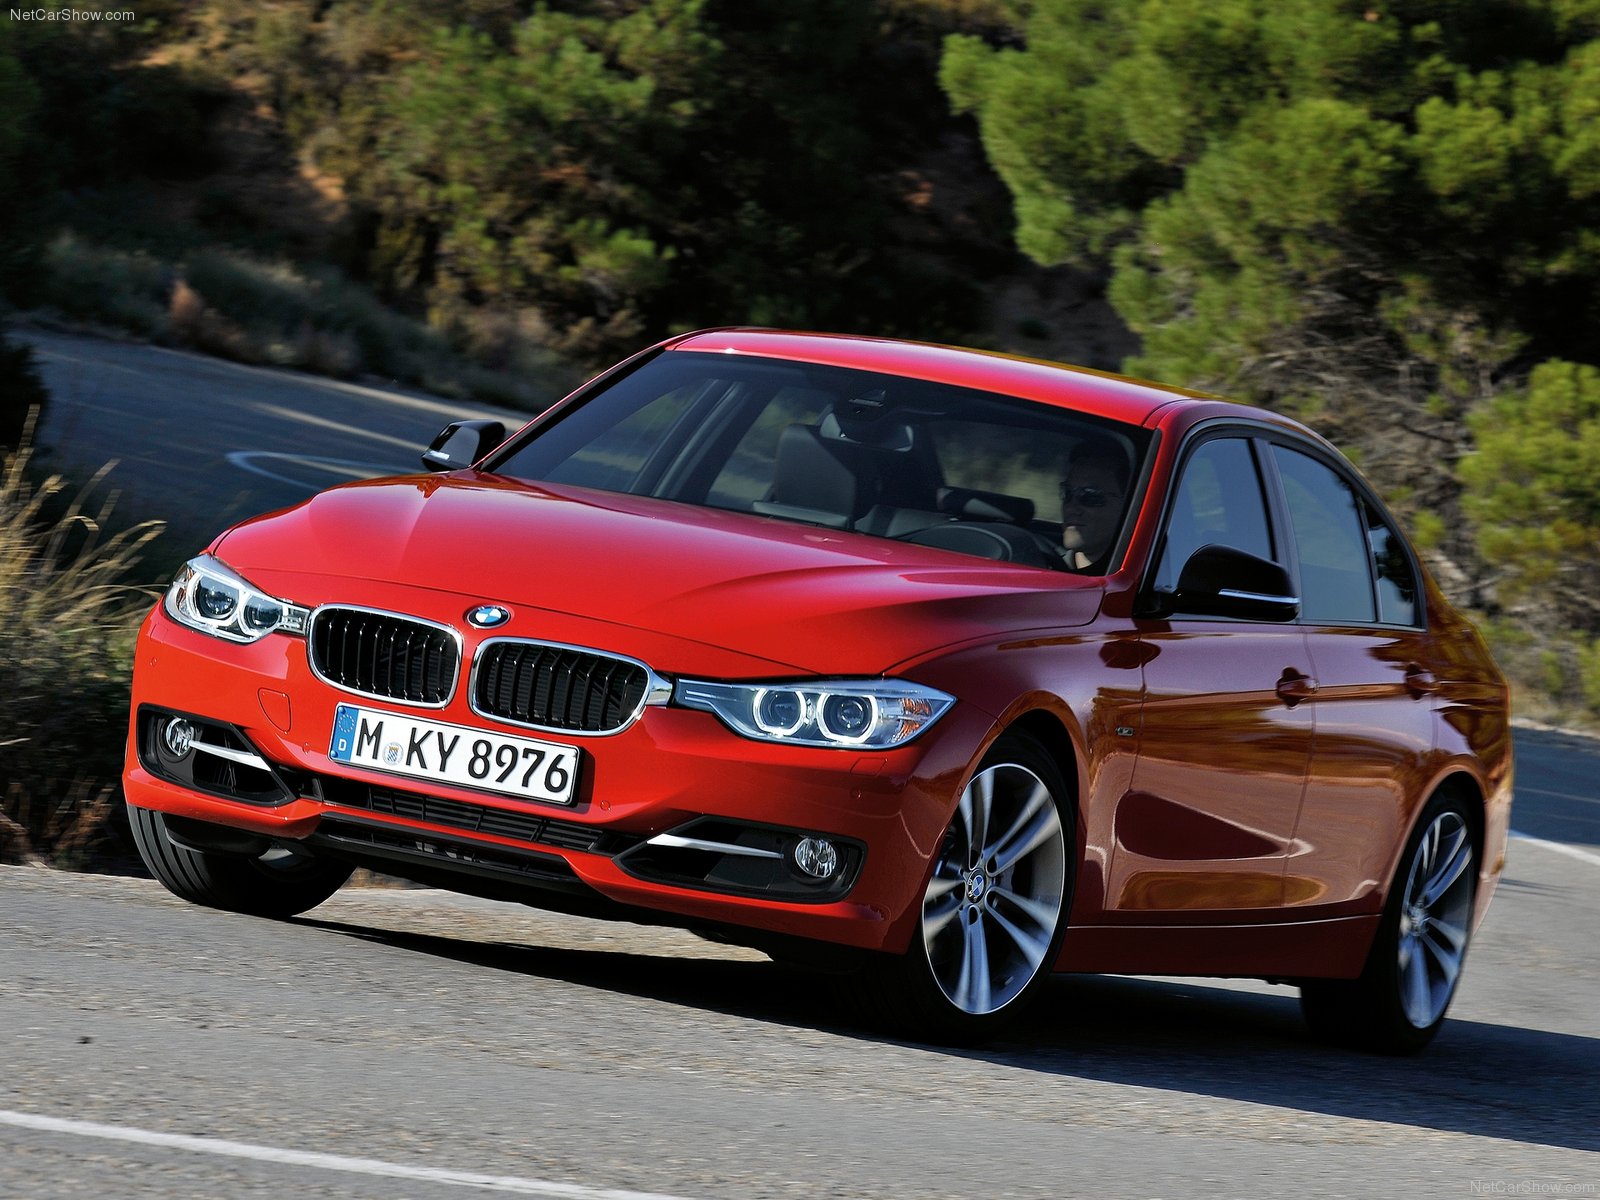 BMW 3-series F30 photos - PhotoGallery with 94 pics| CarsBase.com